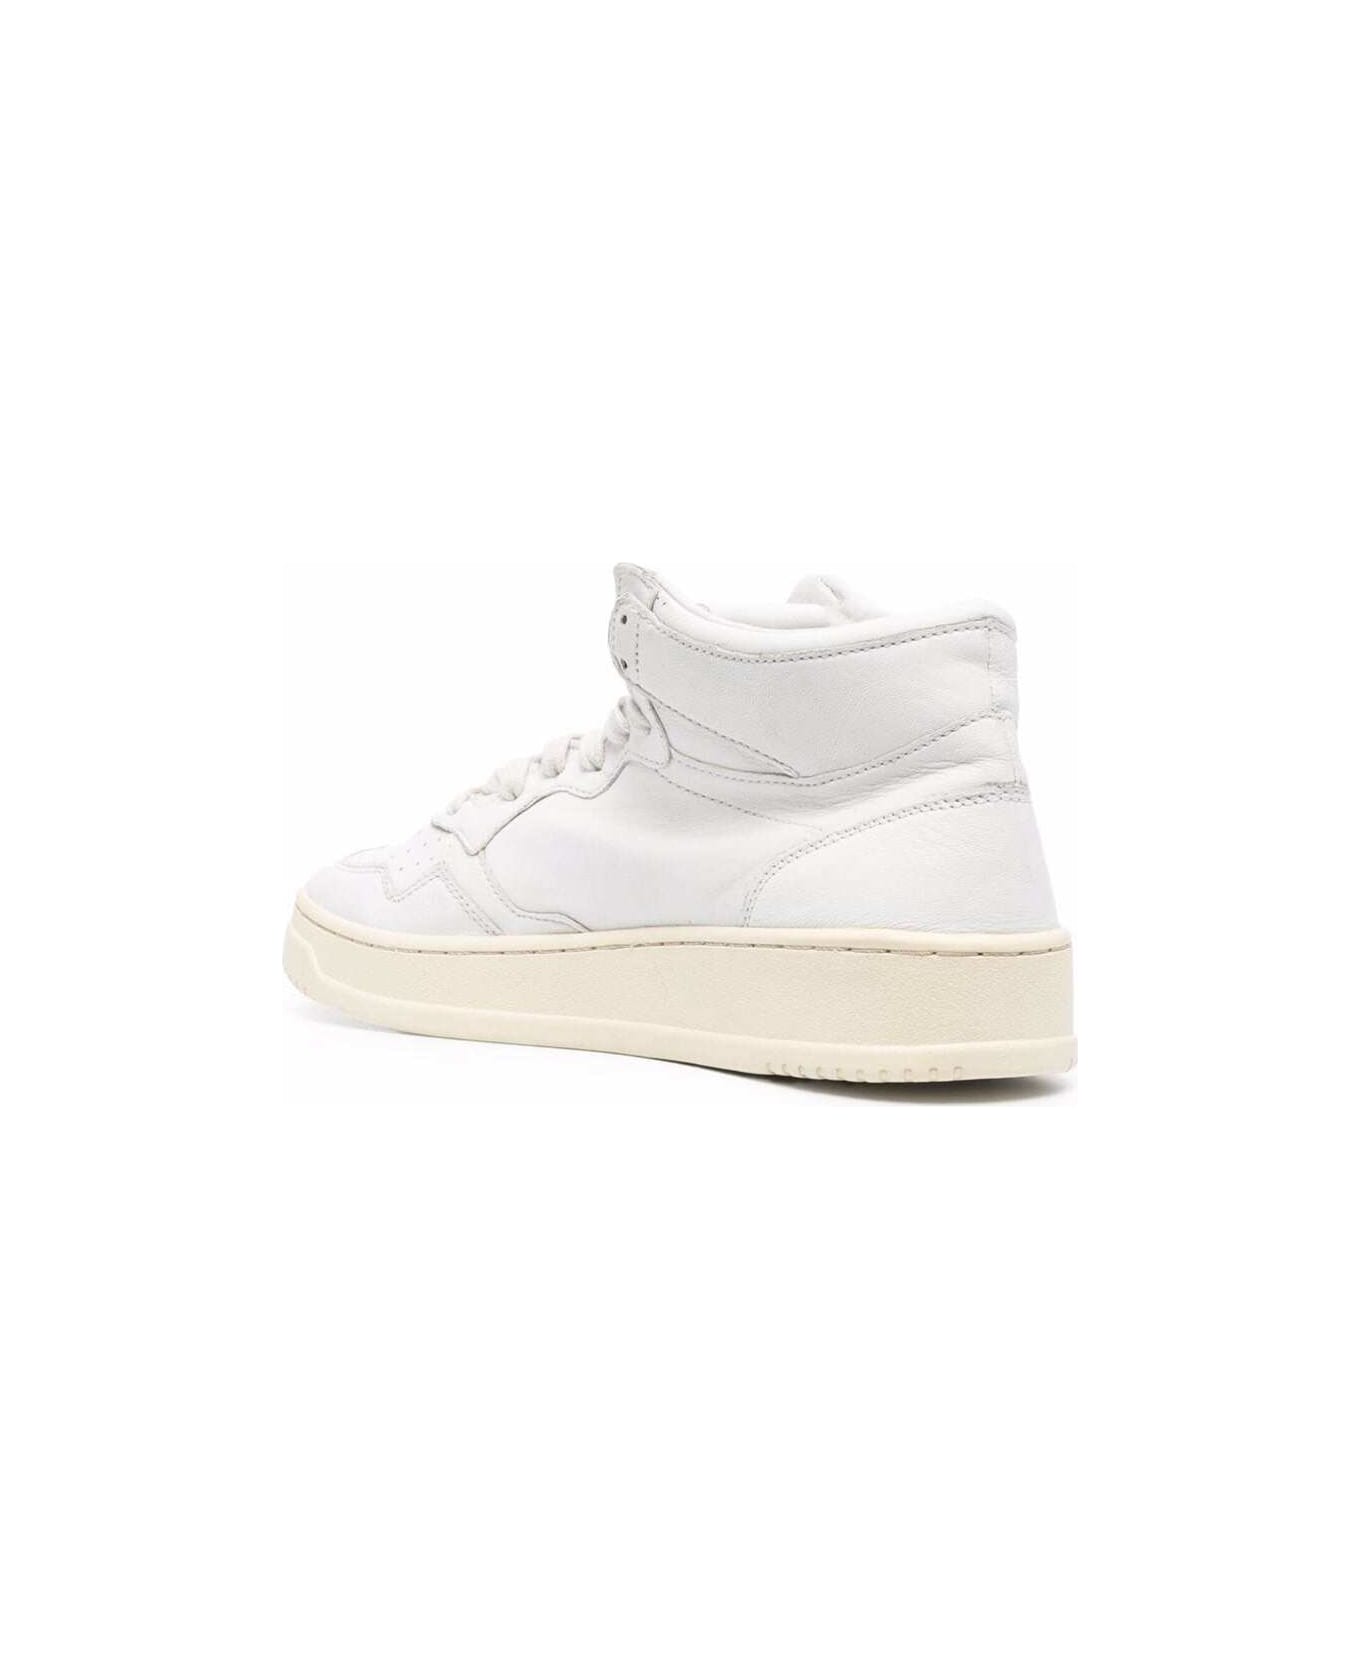 Autry Hig Top White Leather Sneakers With Logo Autry Man - White スニーカー